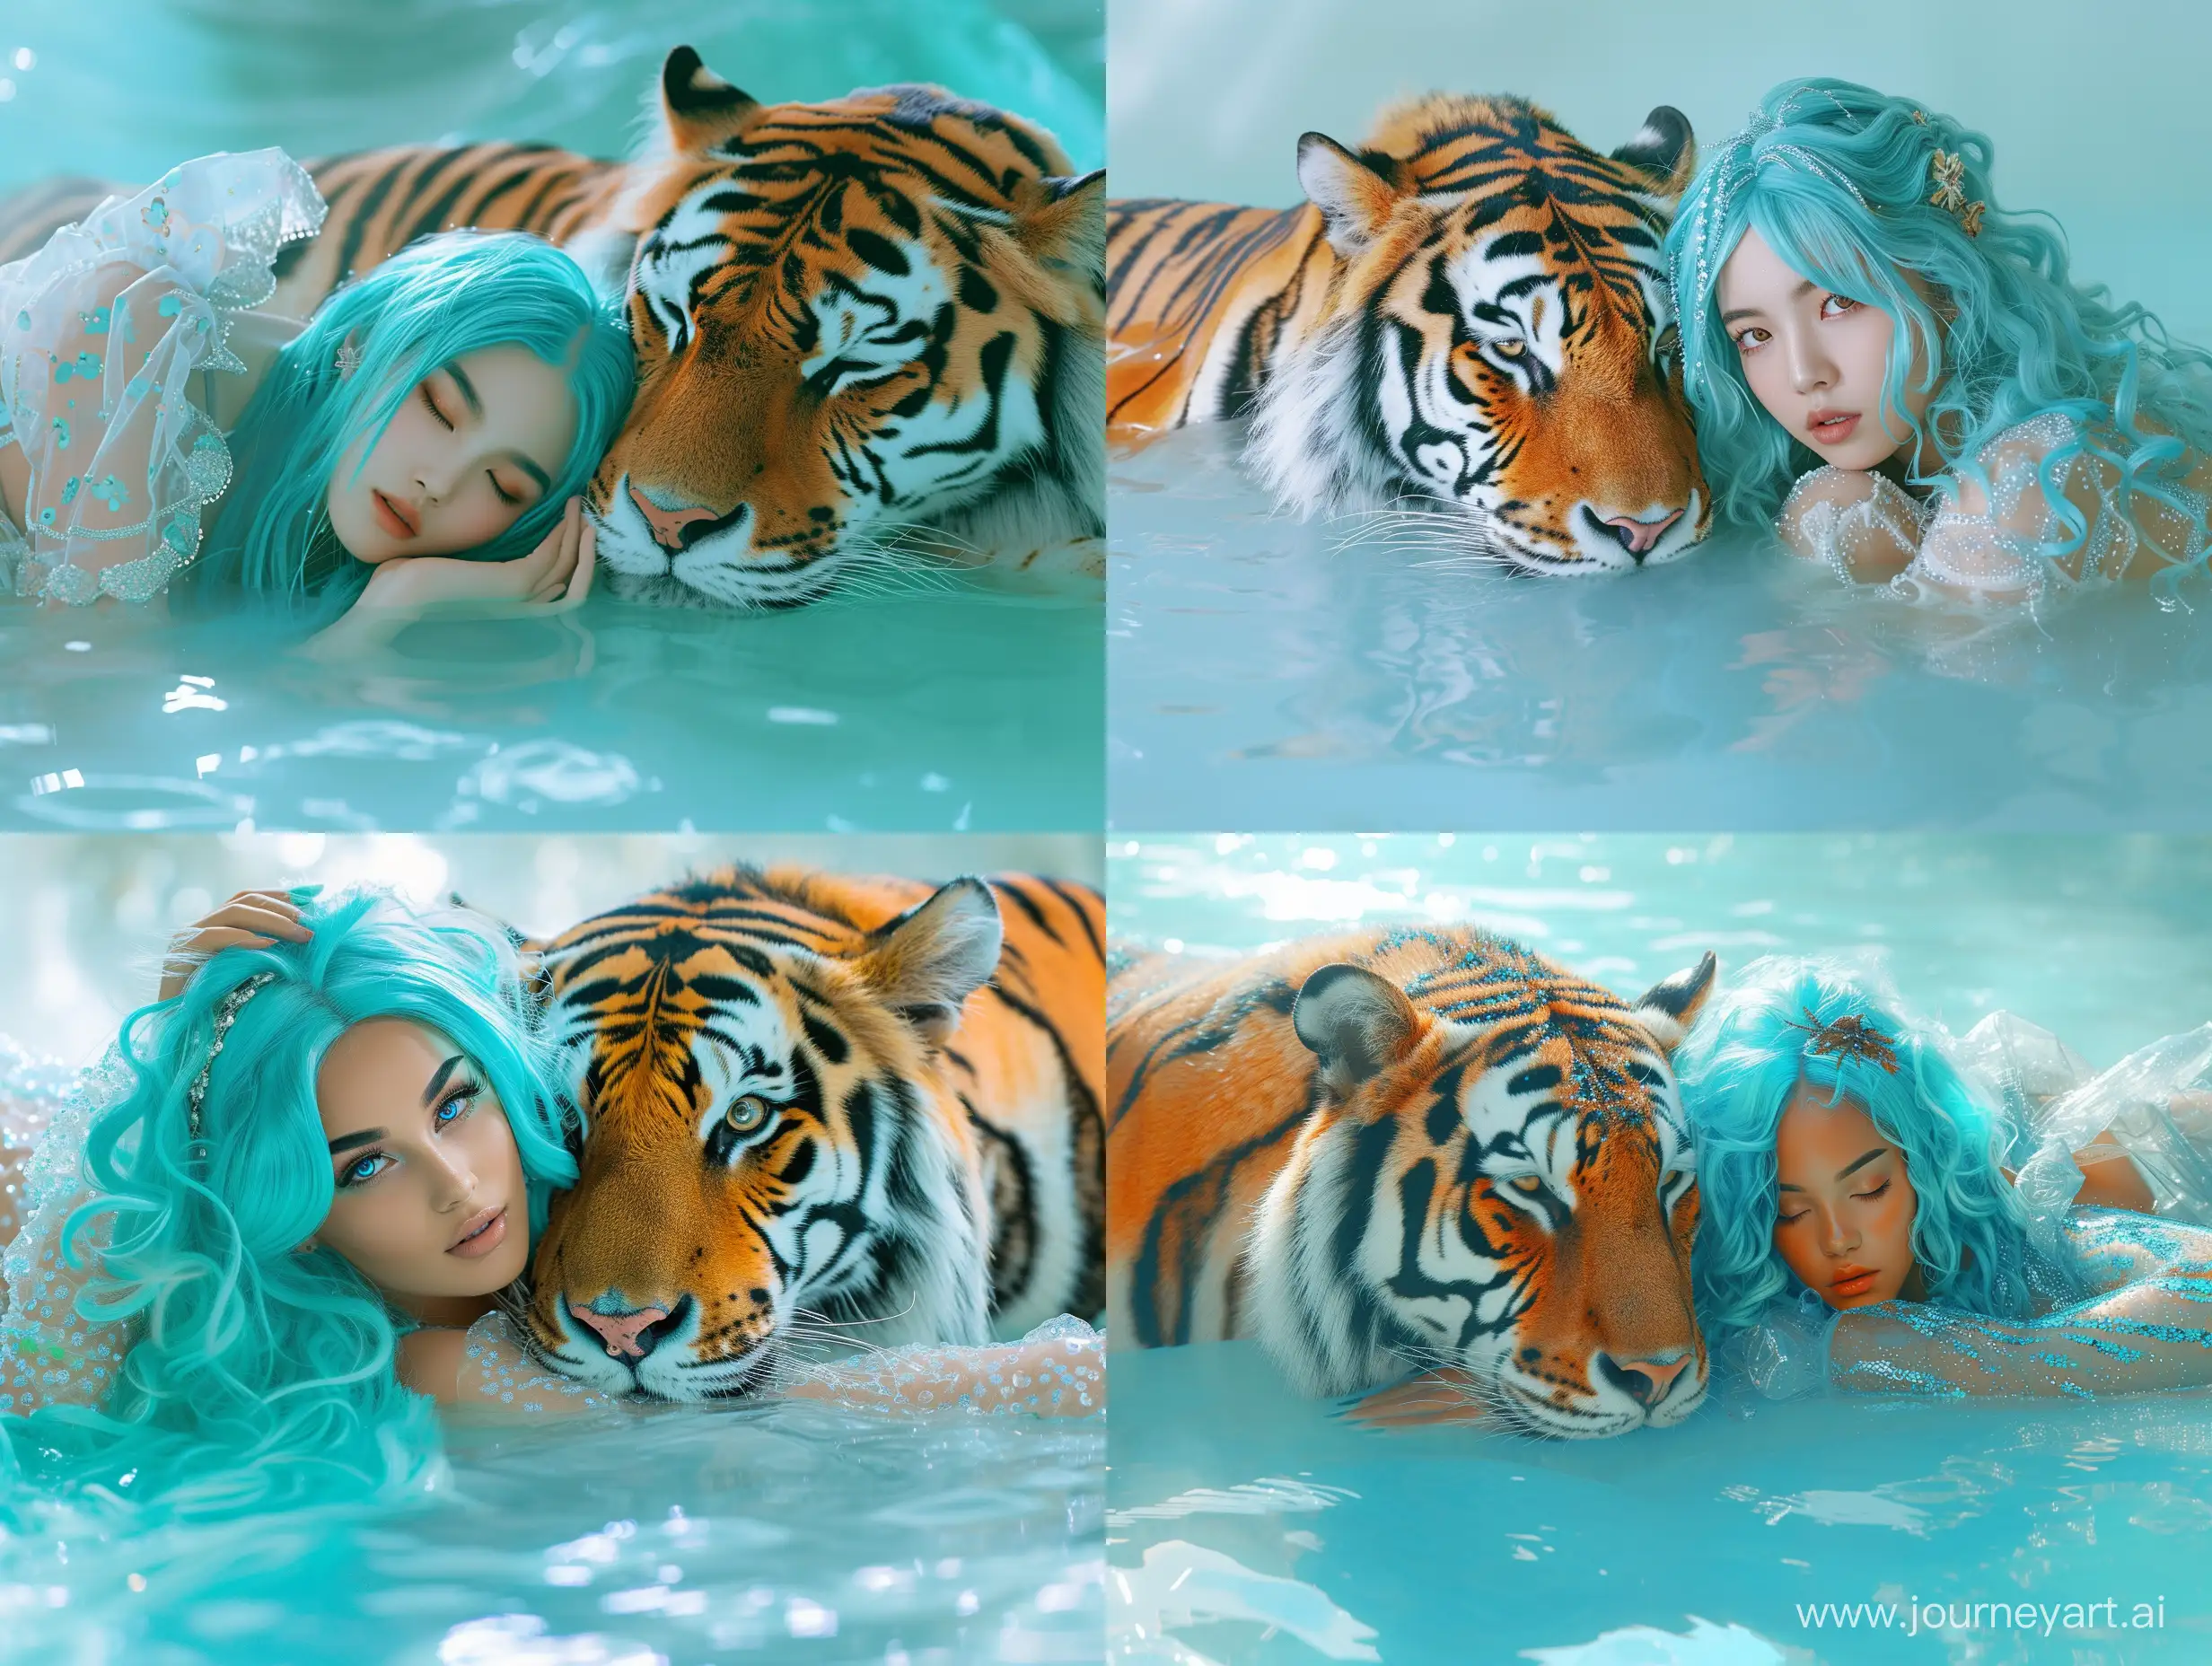 Dreamlike-Fusion-12YearOld-Girl-in-Surreal-Blue-Water-World-with-a-Tiger